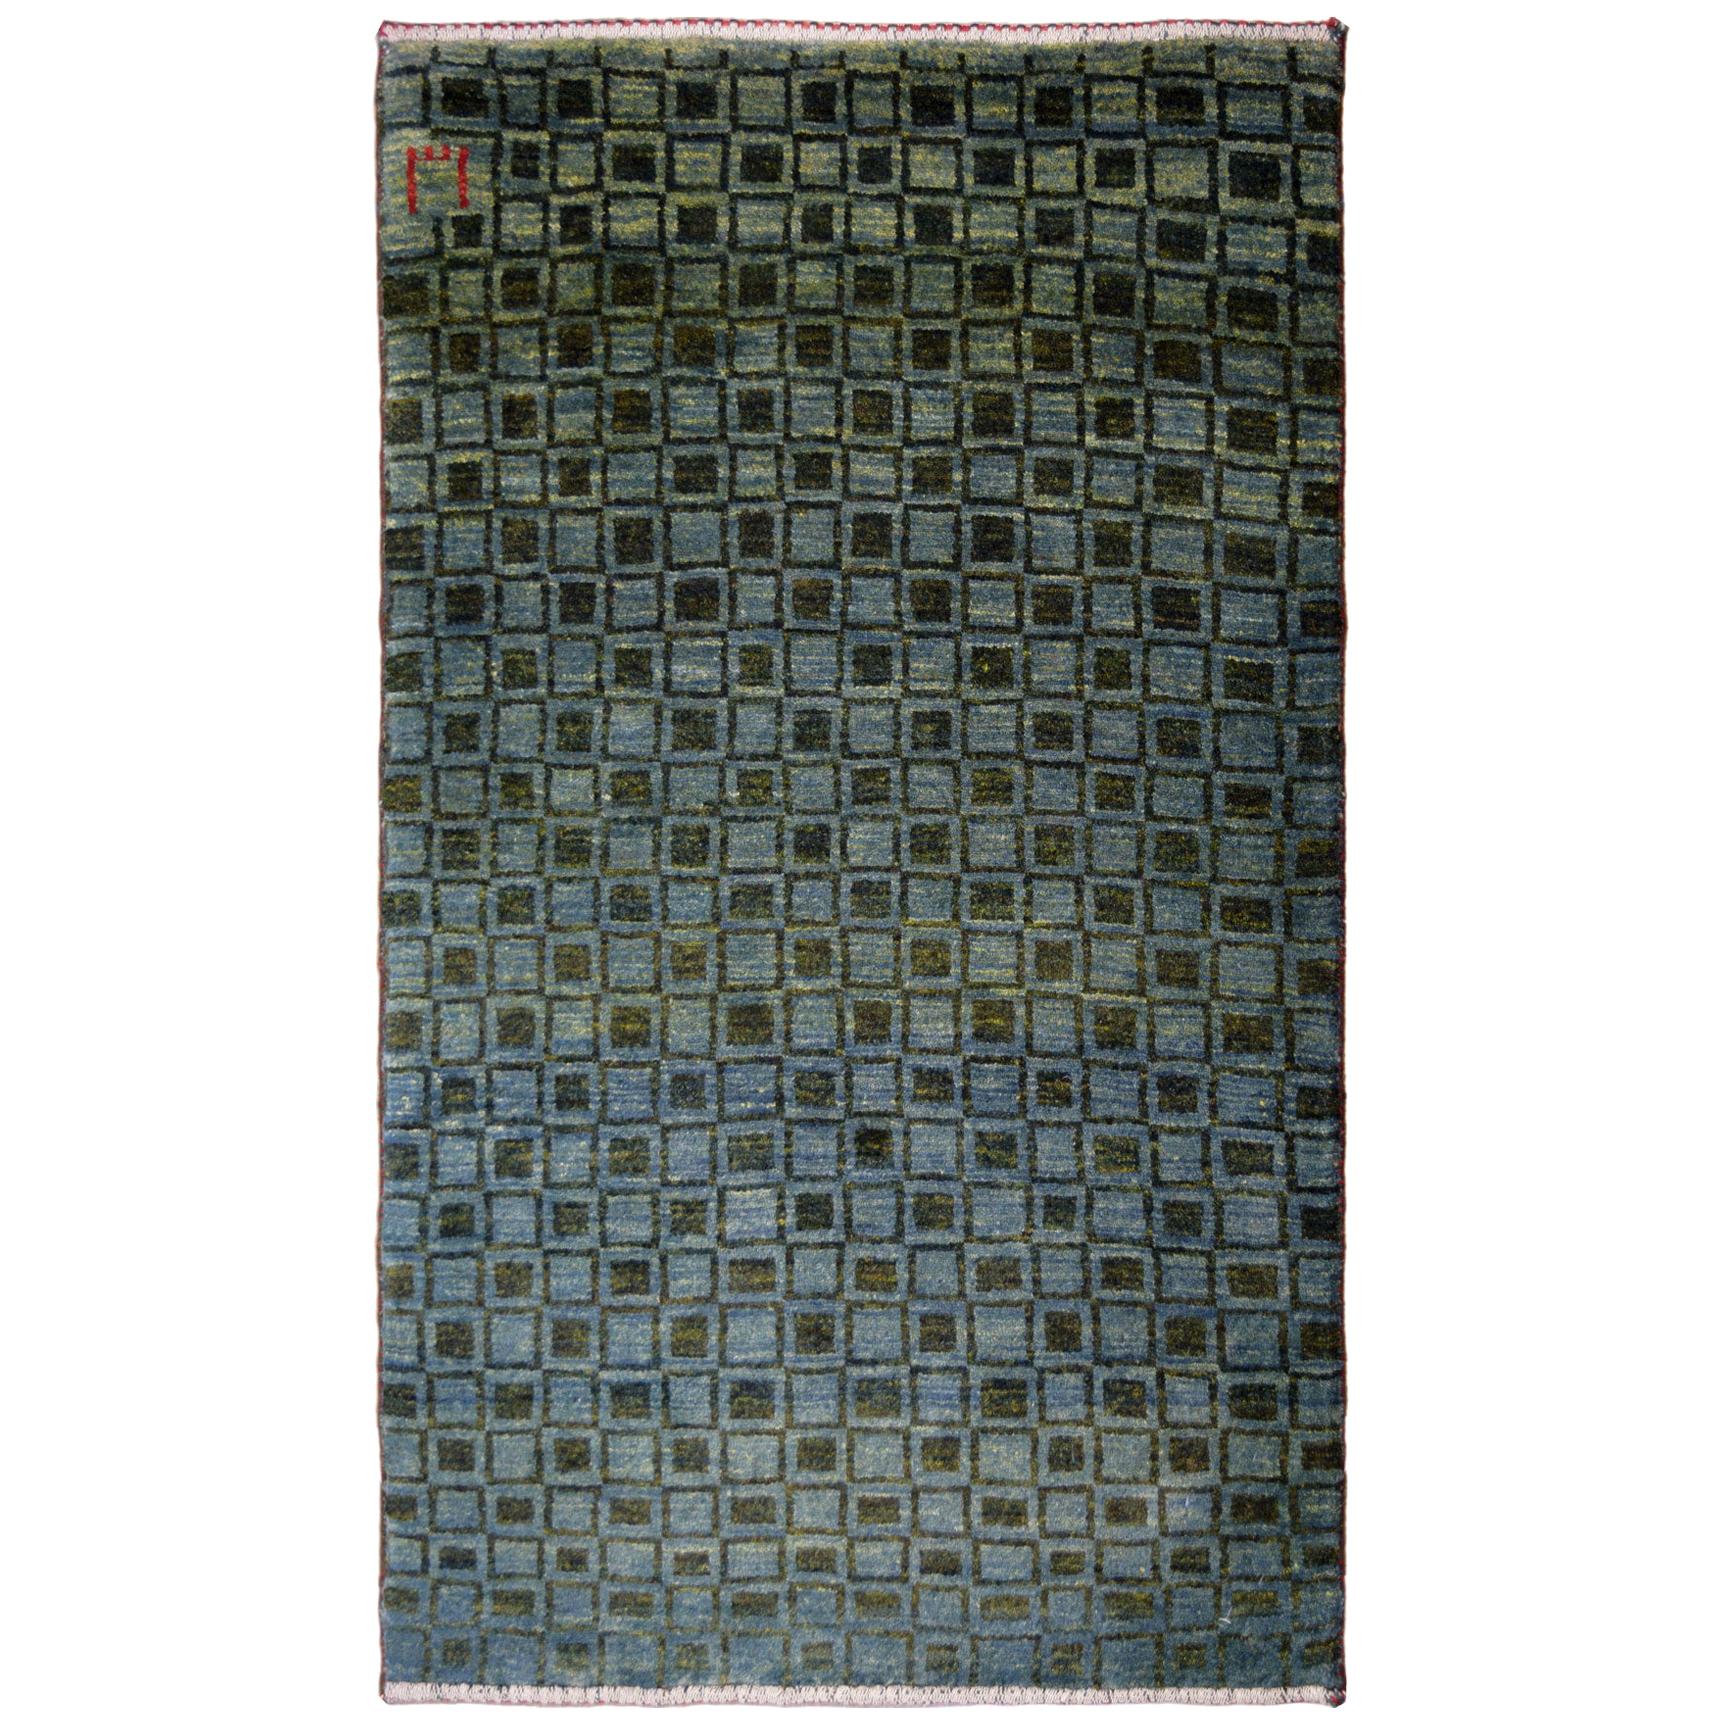 Blue and Green Wool Persian Gabbeh Carpet with Geometric Pattern 3' x 4'